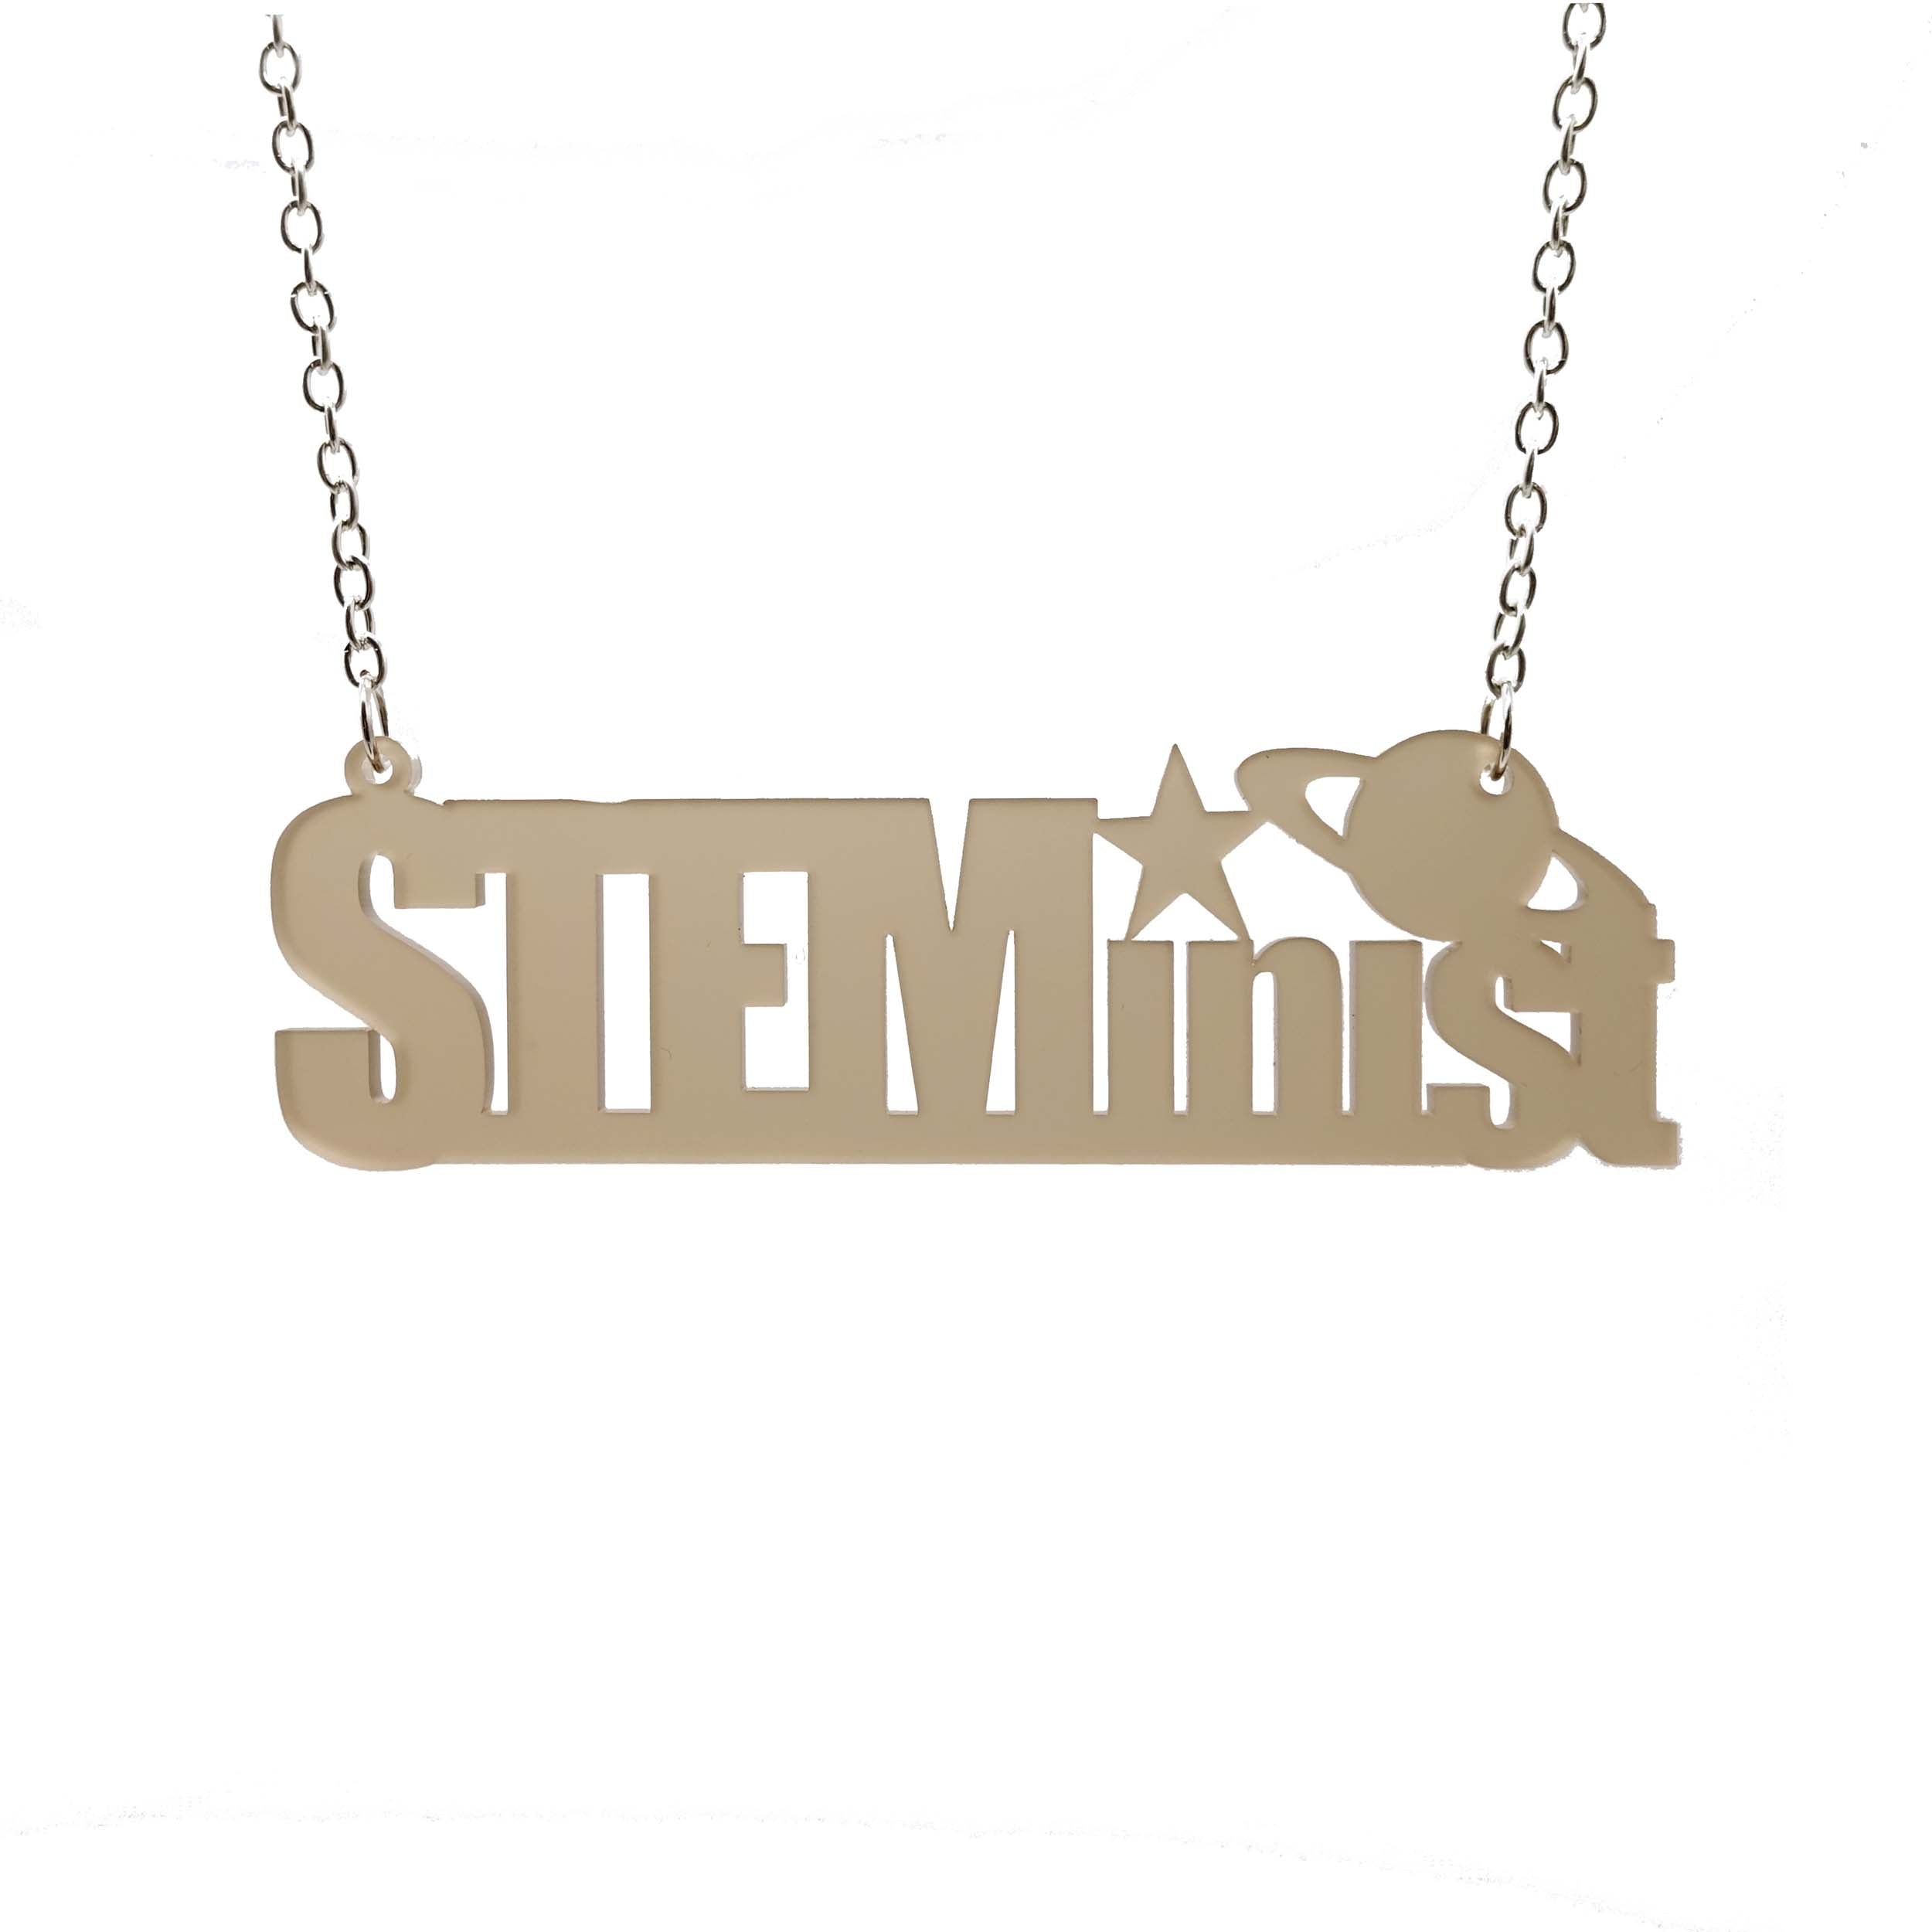  tobacco frost STEMINIST necklace hanging